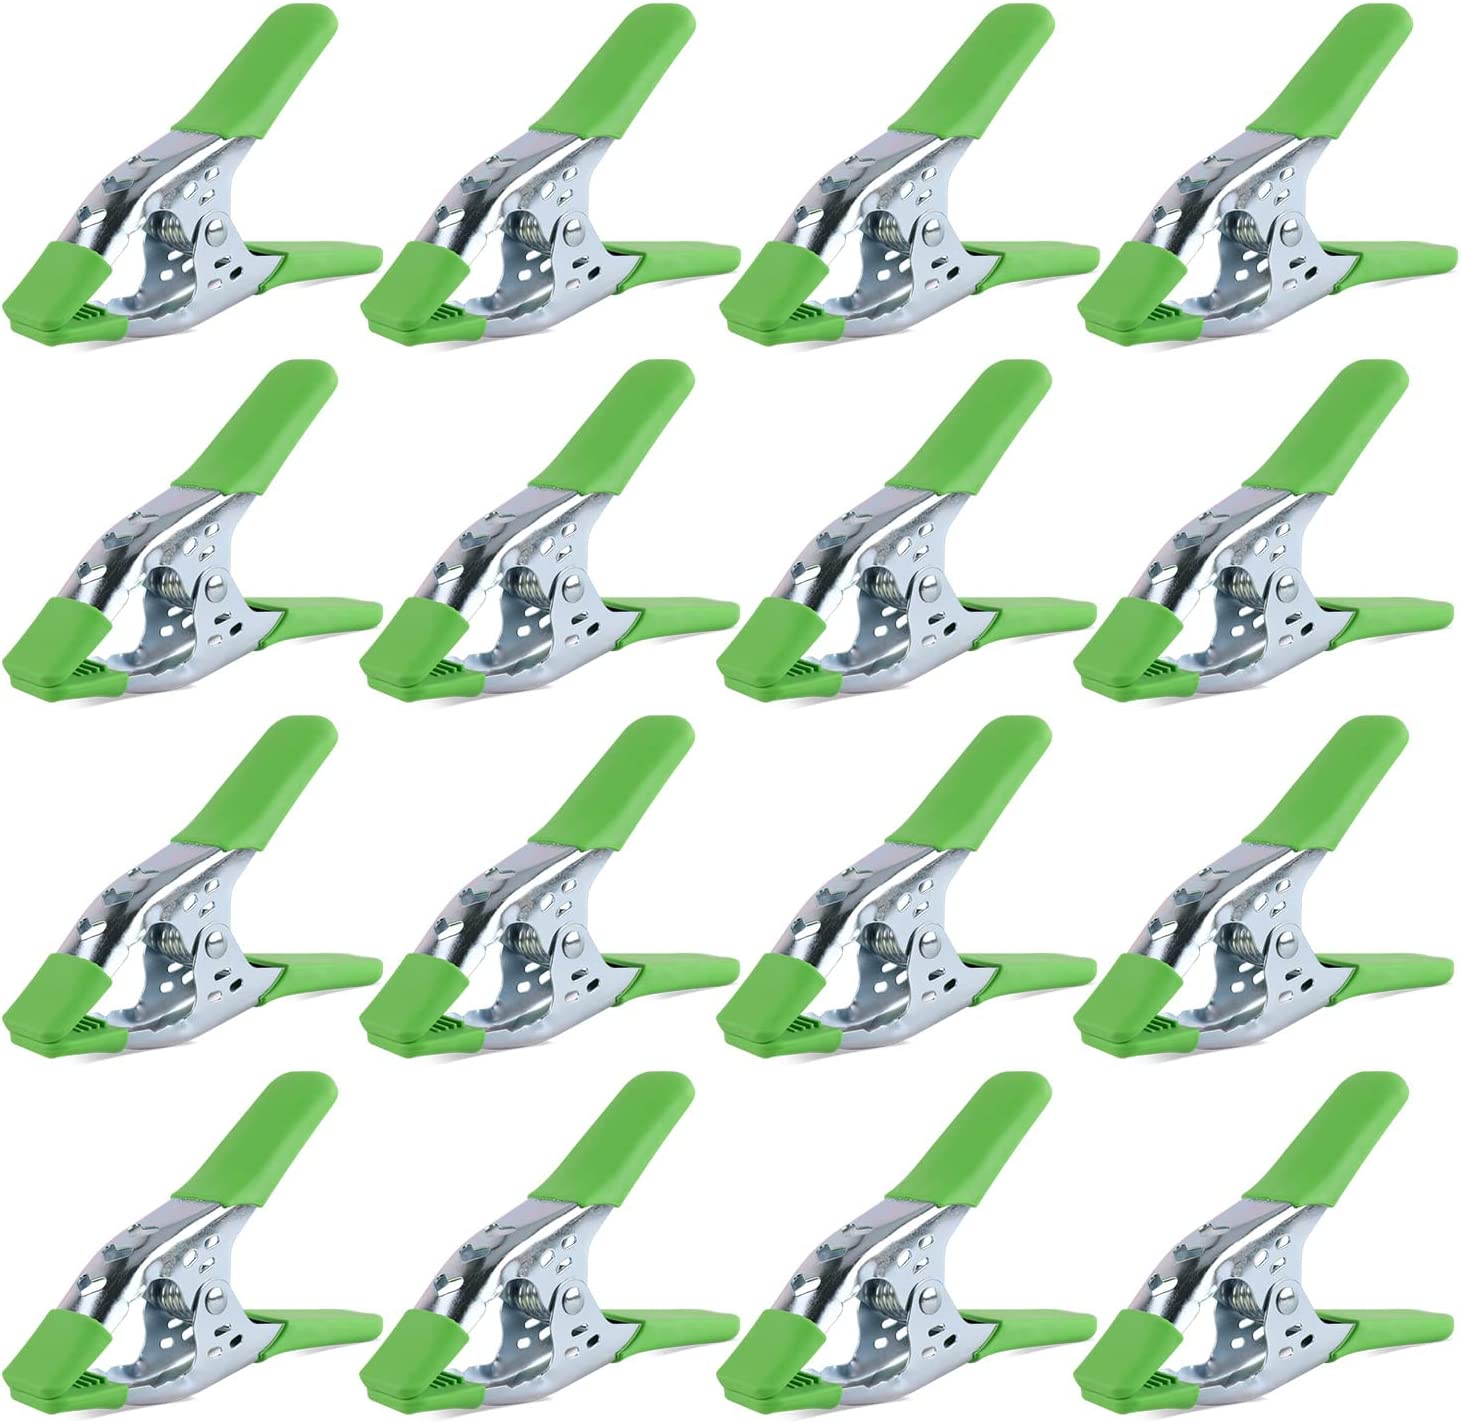 Mr. Pen - Spring Clamps, 6 Pack, 4.5 Inch, Plastic Clamps, Backdrop Clamps,  Clamps Set, Clamps for